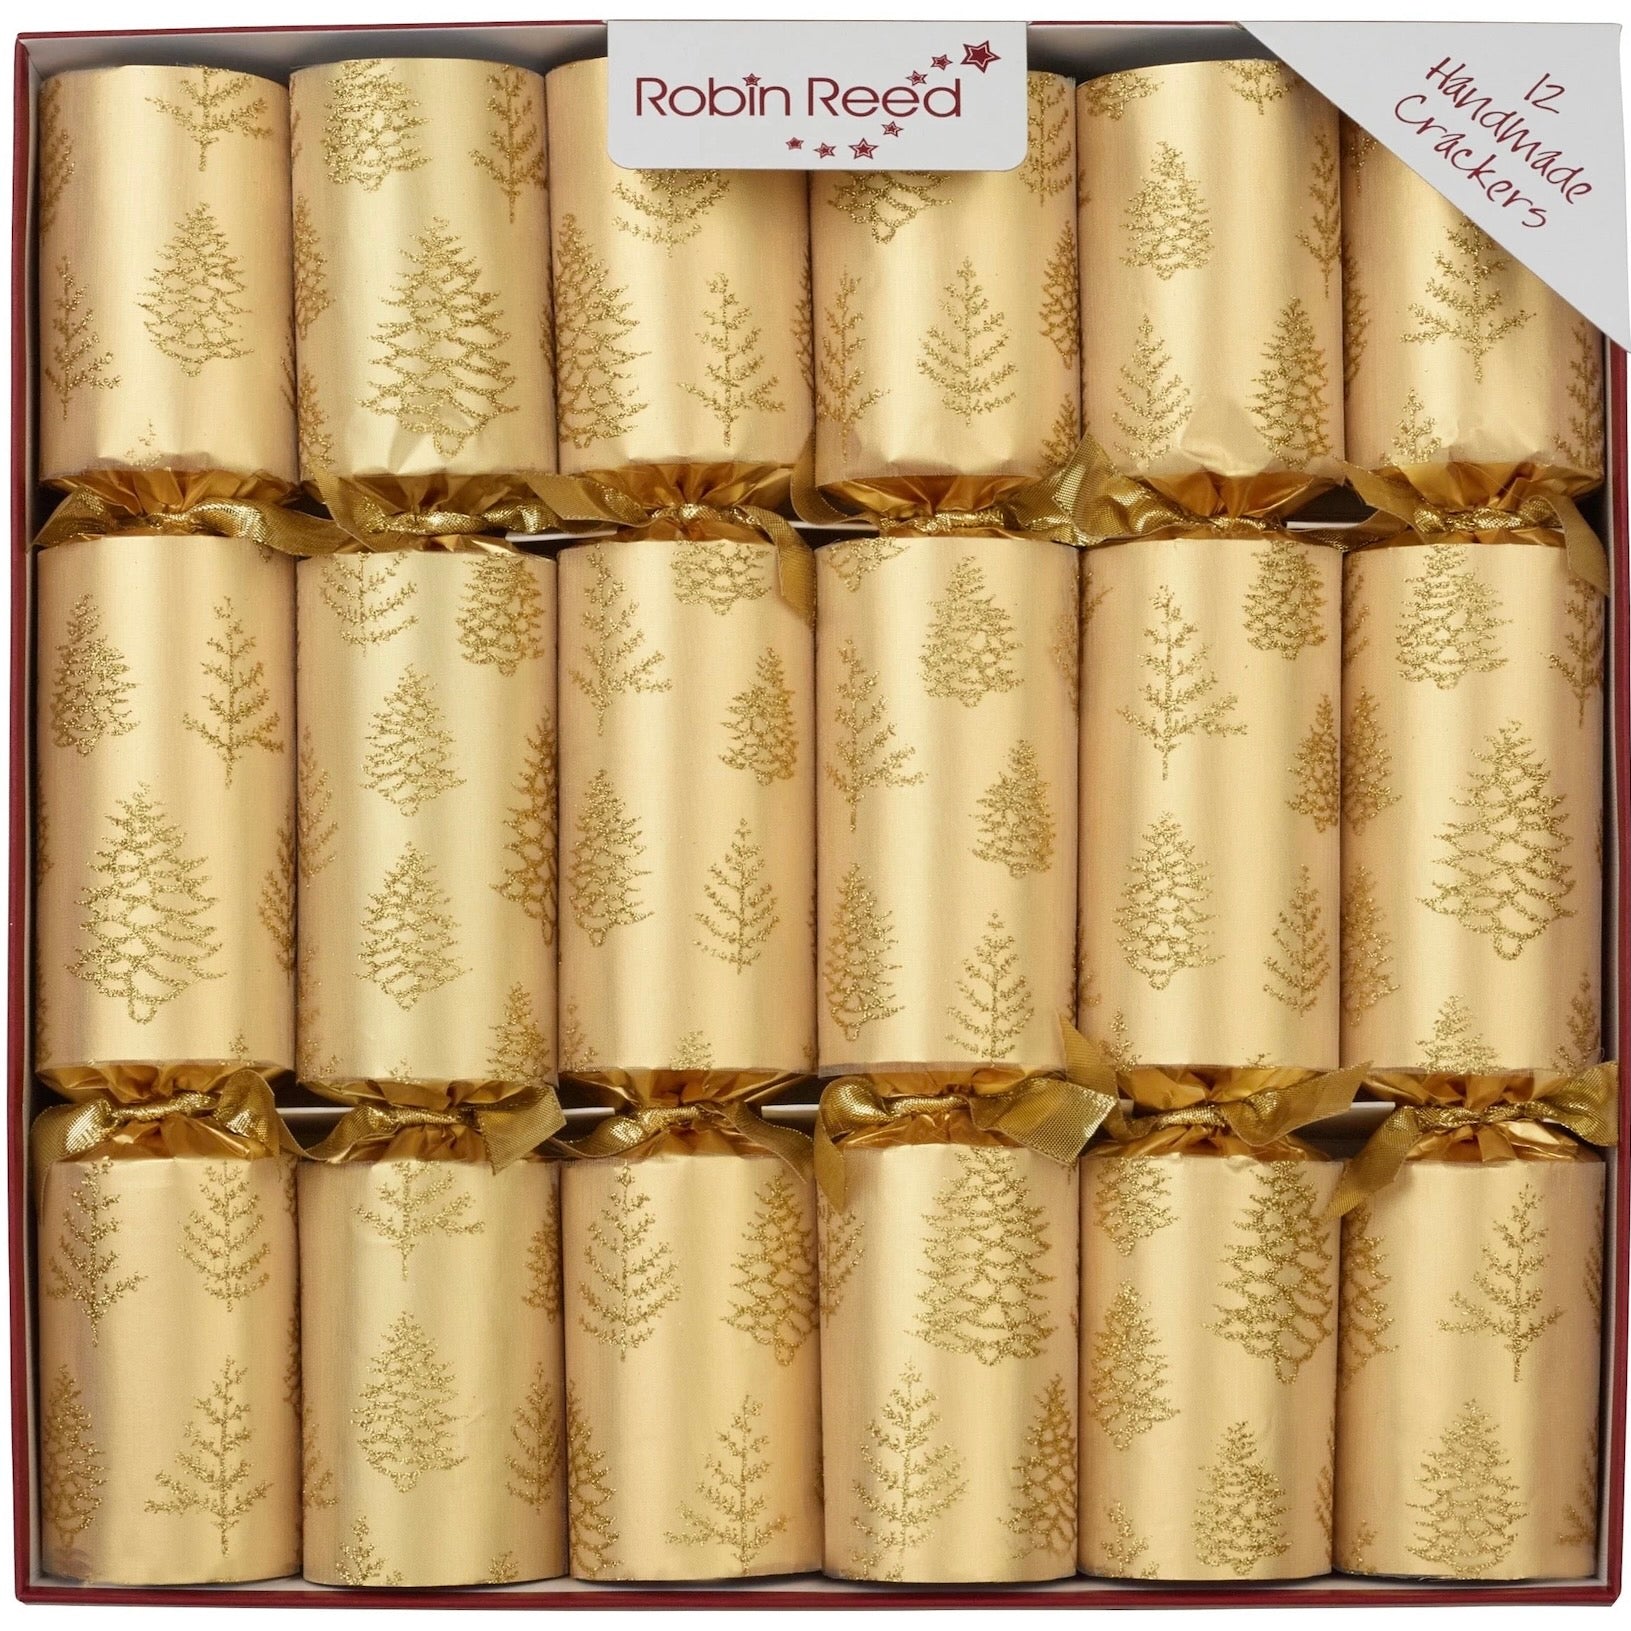 Robin Reed "Gold Tree Flakes" Christmas Crackers